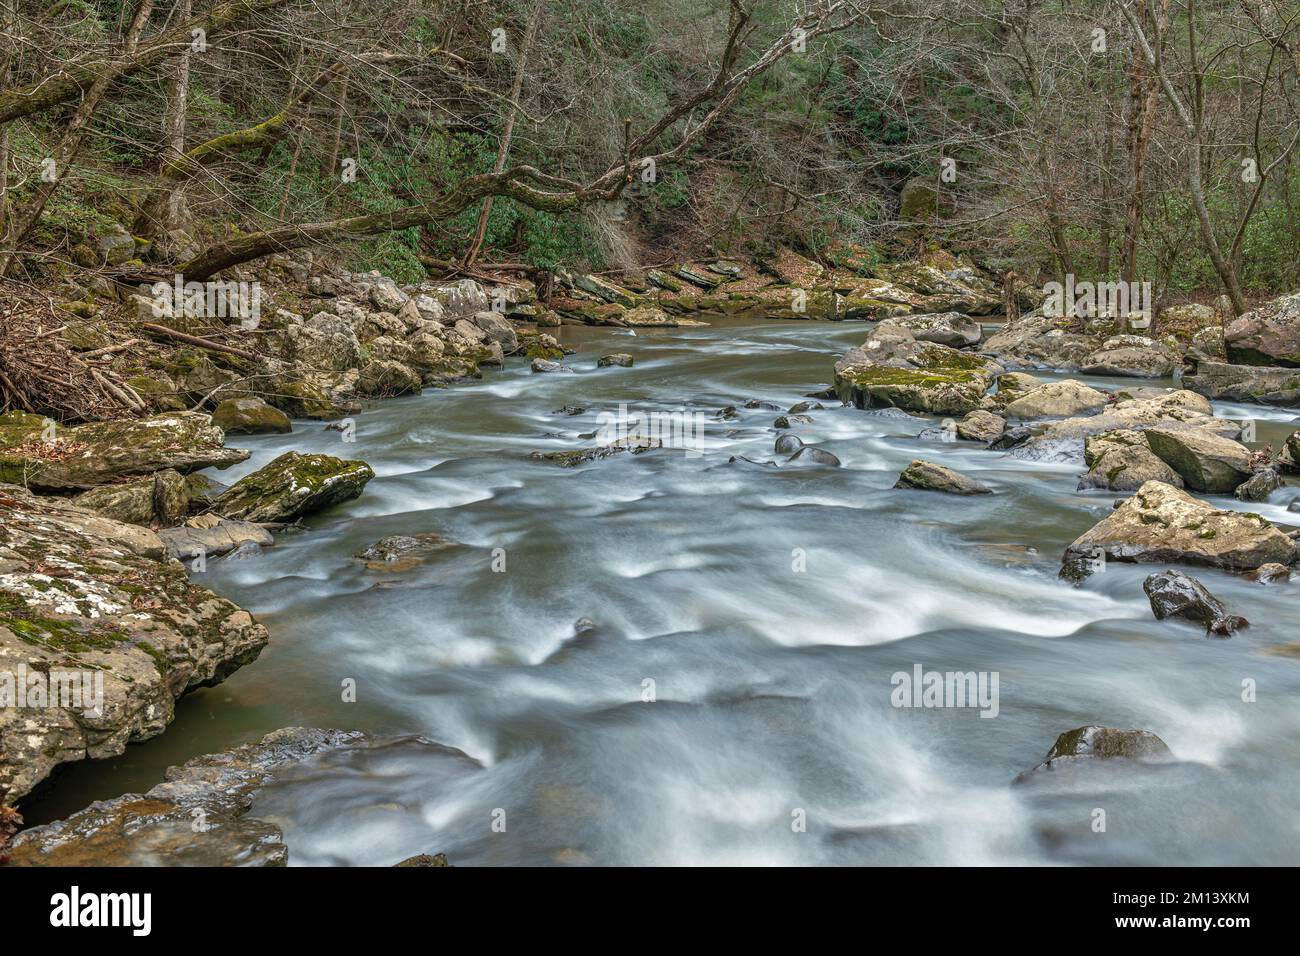 Water flowing through a rocky river in Cumberland Mountain Tennessee shows the peaceful, surreal tone of being in the wilderness. Stock Photo